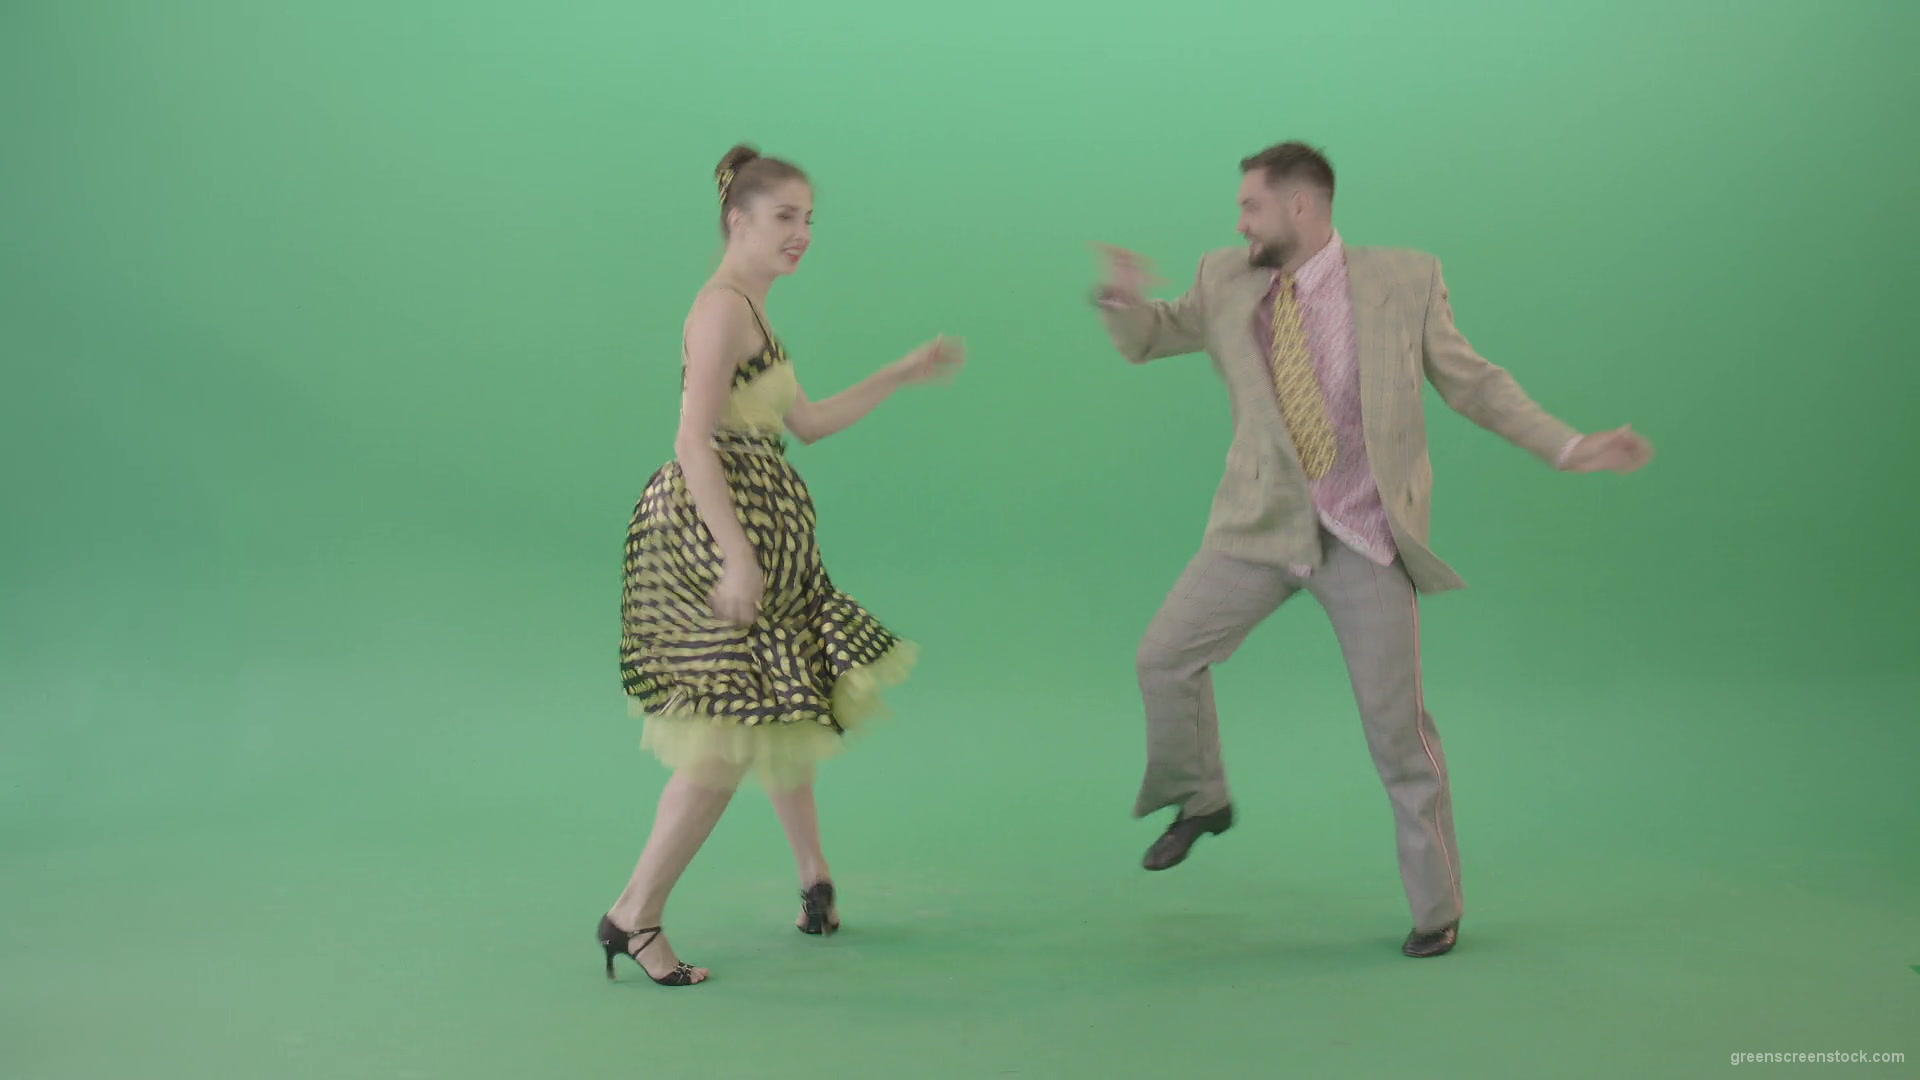 Beautiful-man-and-woman-dancing-Lindy-Hop-Jazz-and-Swing-dance-isolated-on-Green-Screen-4K-Video-Footage-1920_004 Green Screen Stock